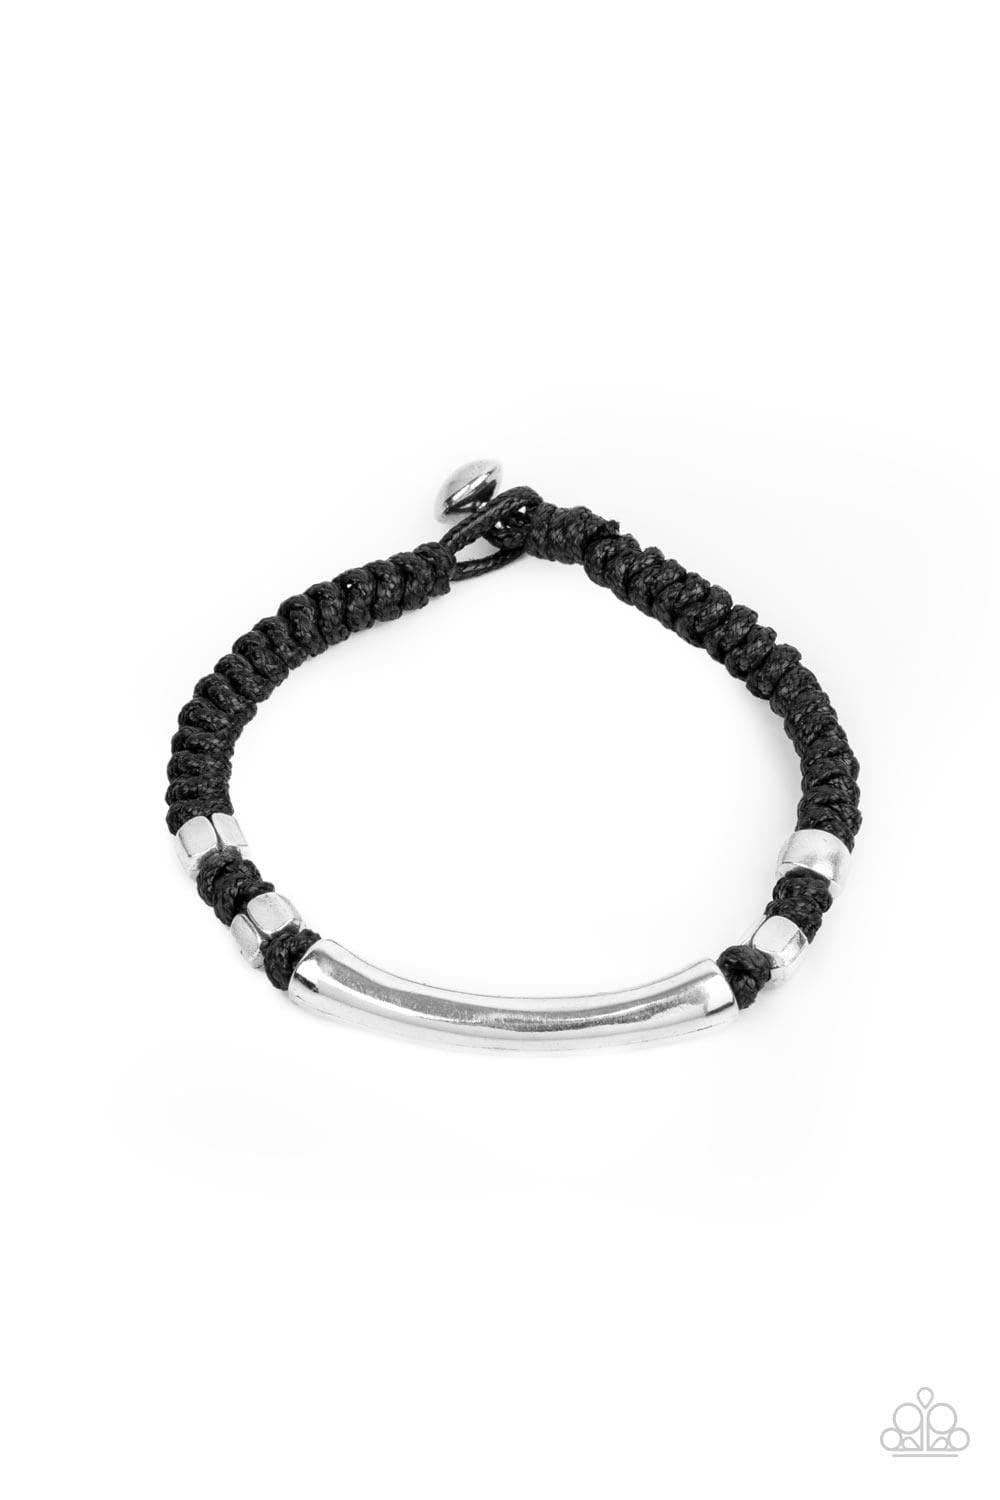 Paparazzi Accessories - Grounded In Grit - Black Urban Bracelet - Bling by JessieK